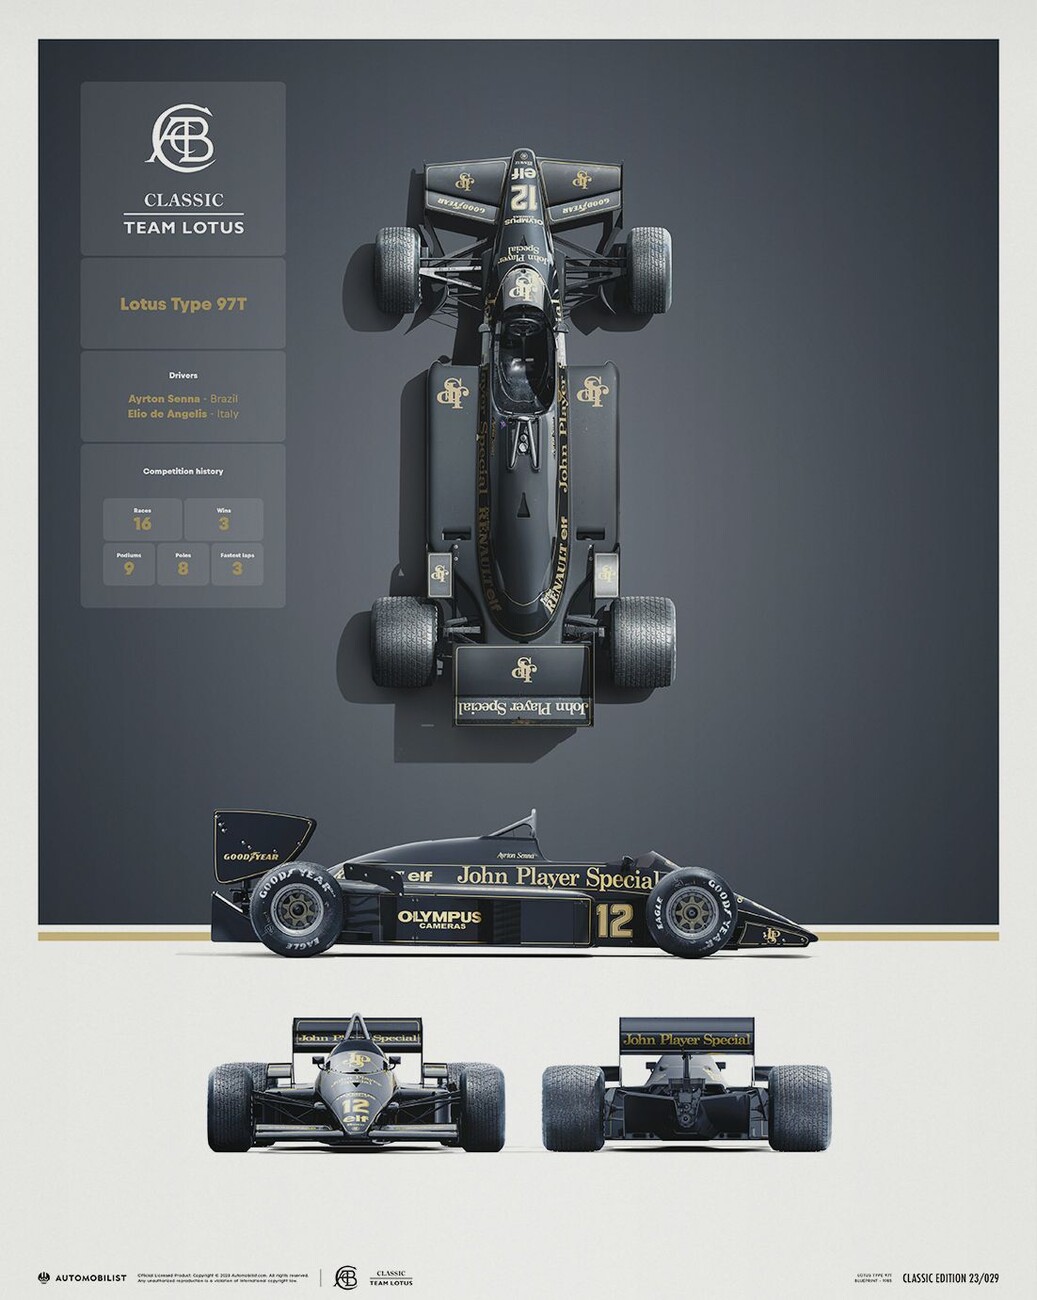 Senna's greatest race was in a Lotus - Classic Team Lotus